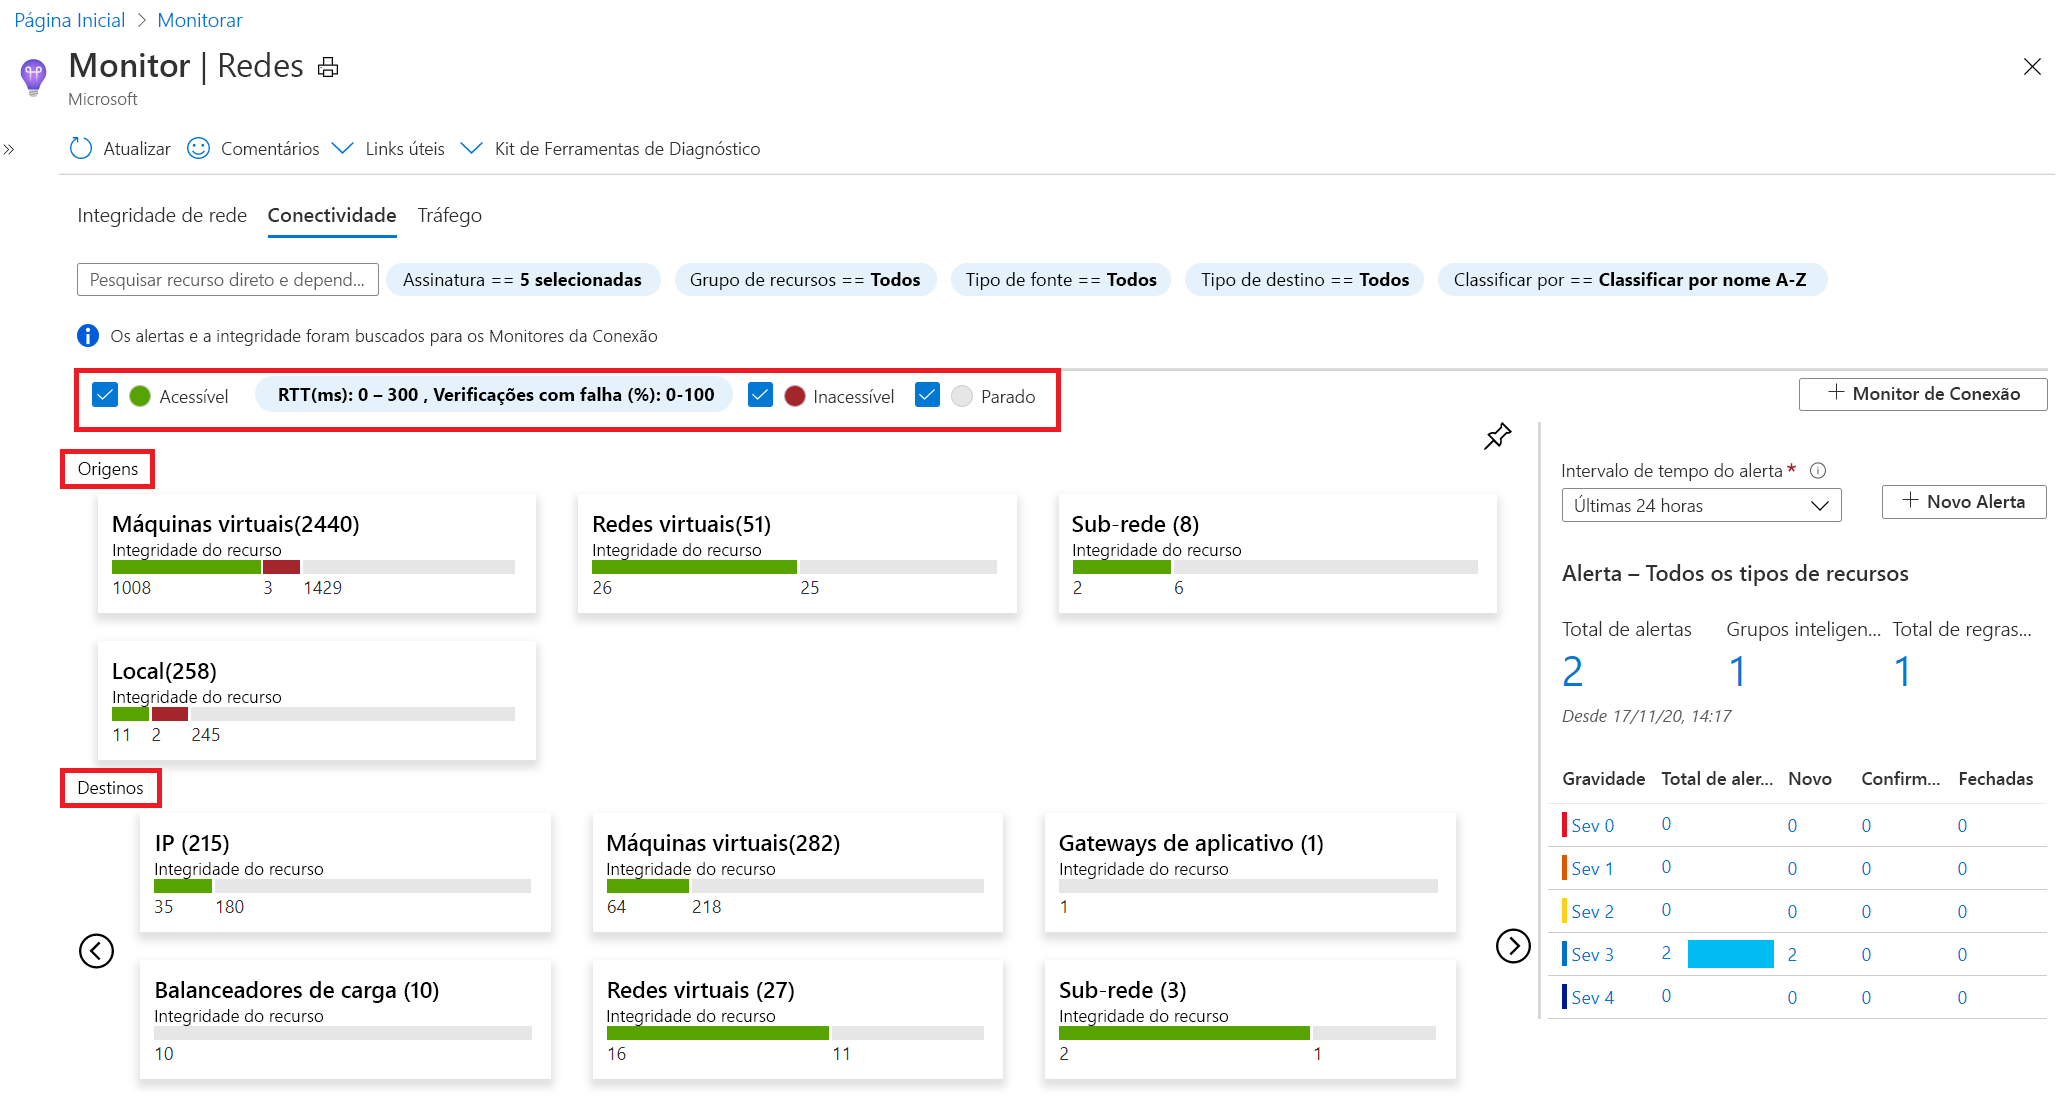 Azure Monitor Network Insights - Connectivity tab